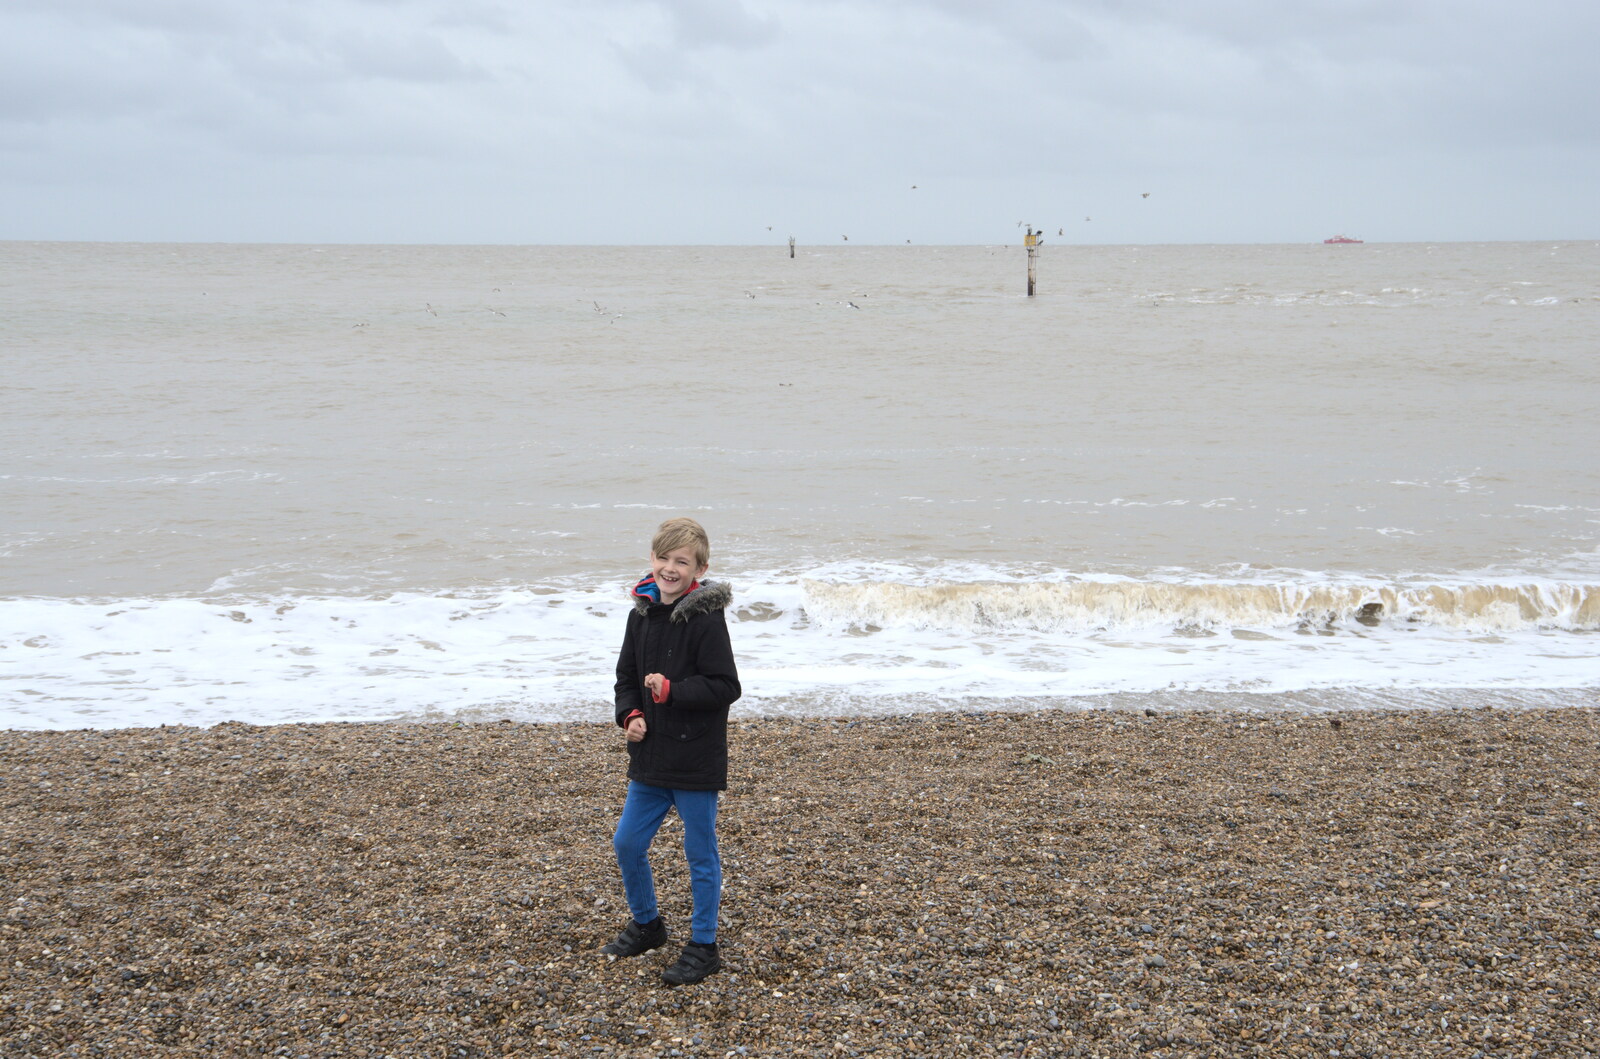 Harry dances on the beach from Sizewell Beach and the Lion Pub, Sizewell and Theberton, Suffolk - 4th October 2020